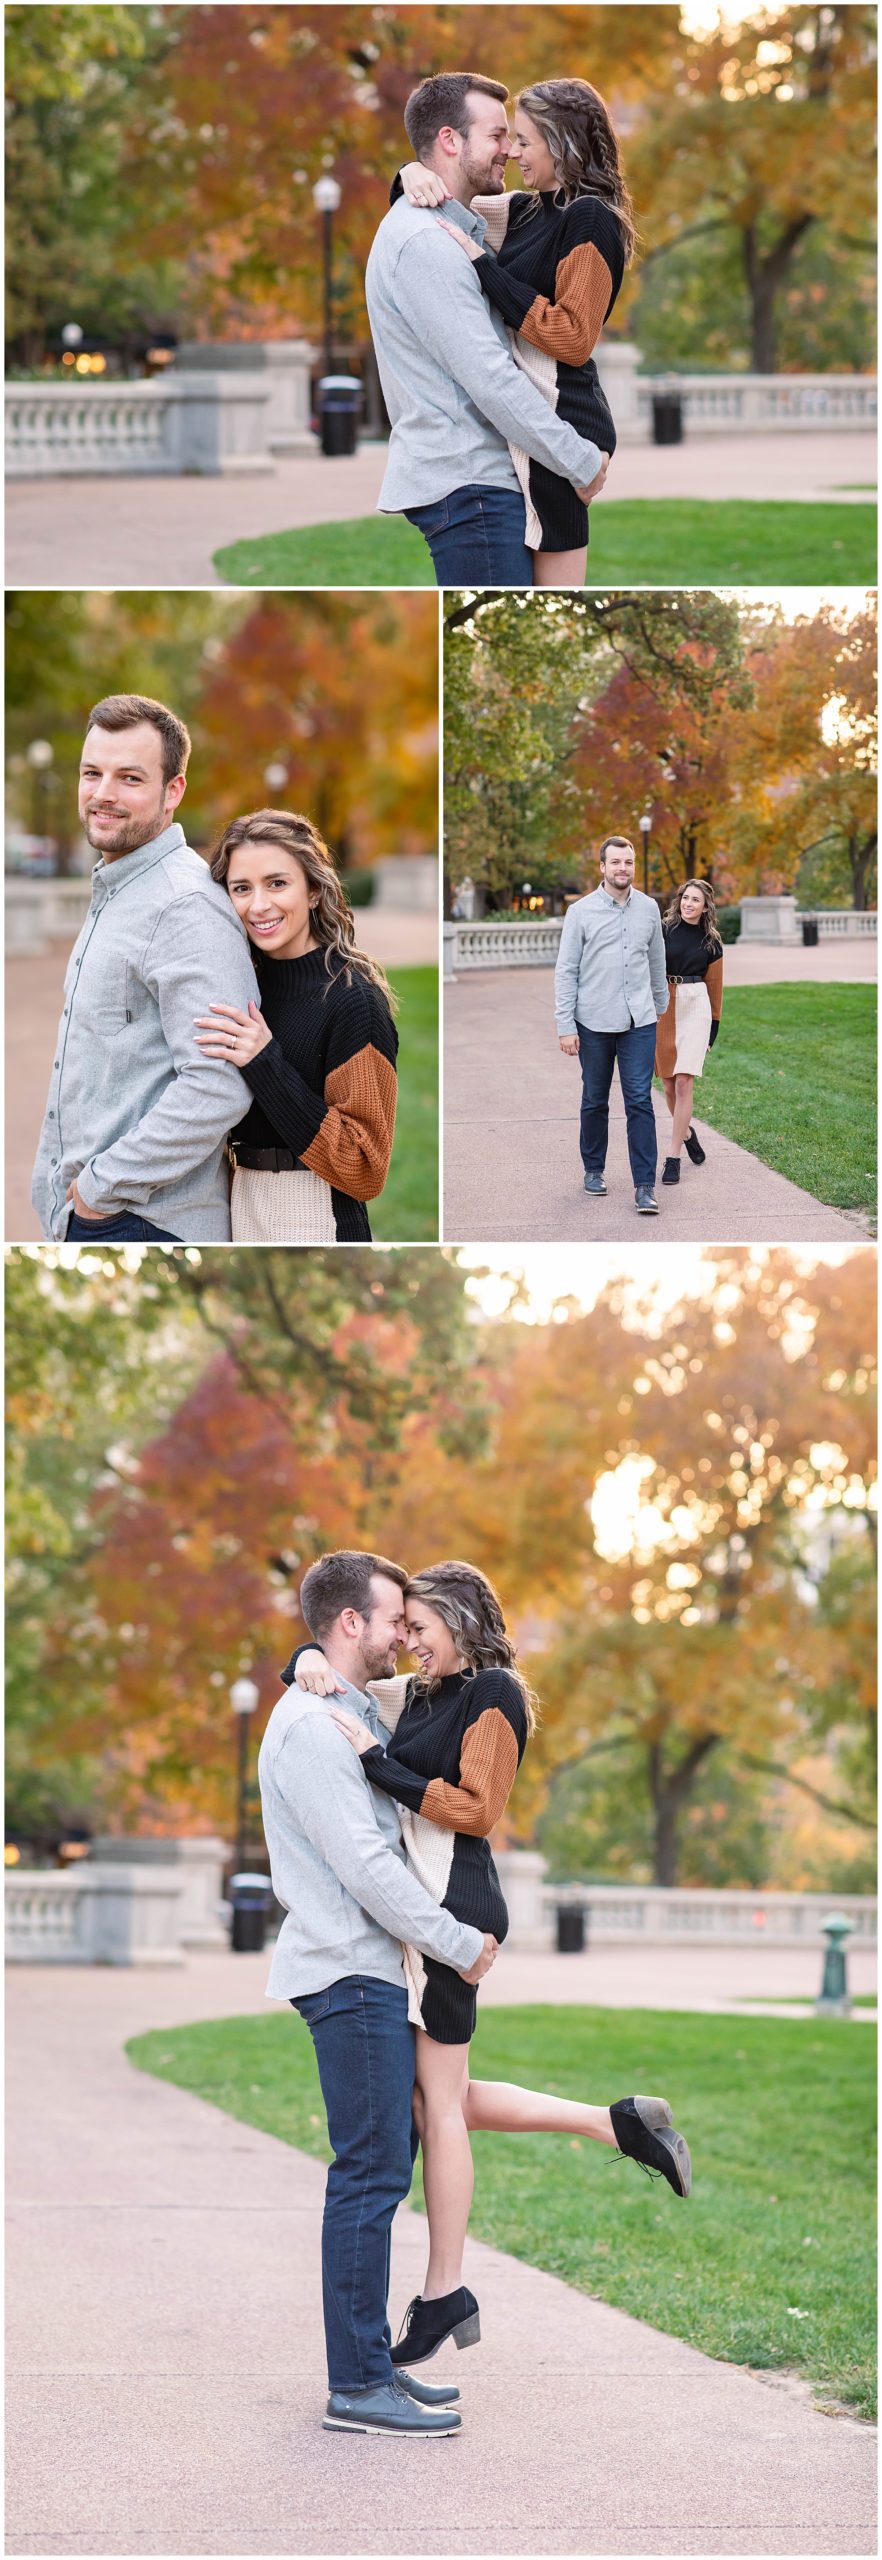 Engagement Photos at the Monona Terrace and Wisconsin Capitol in Madison, WI